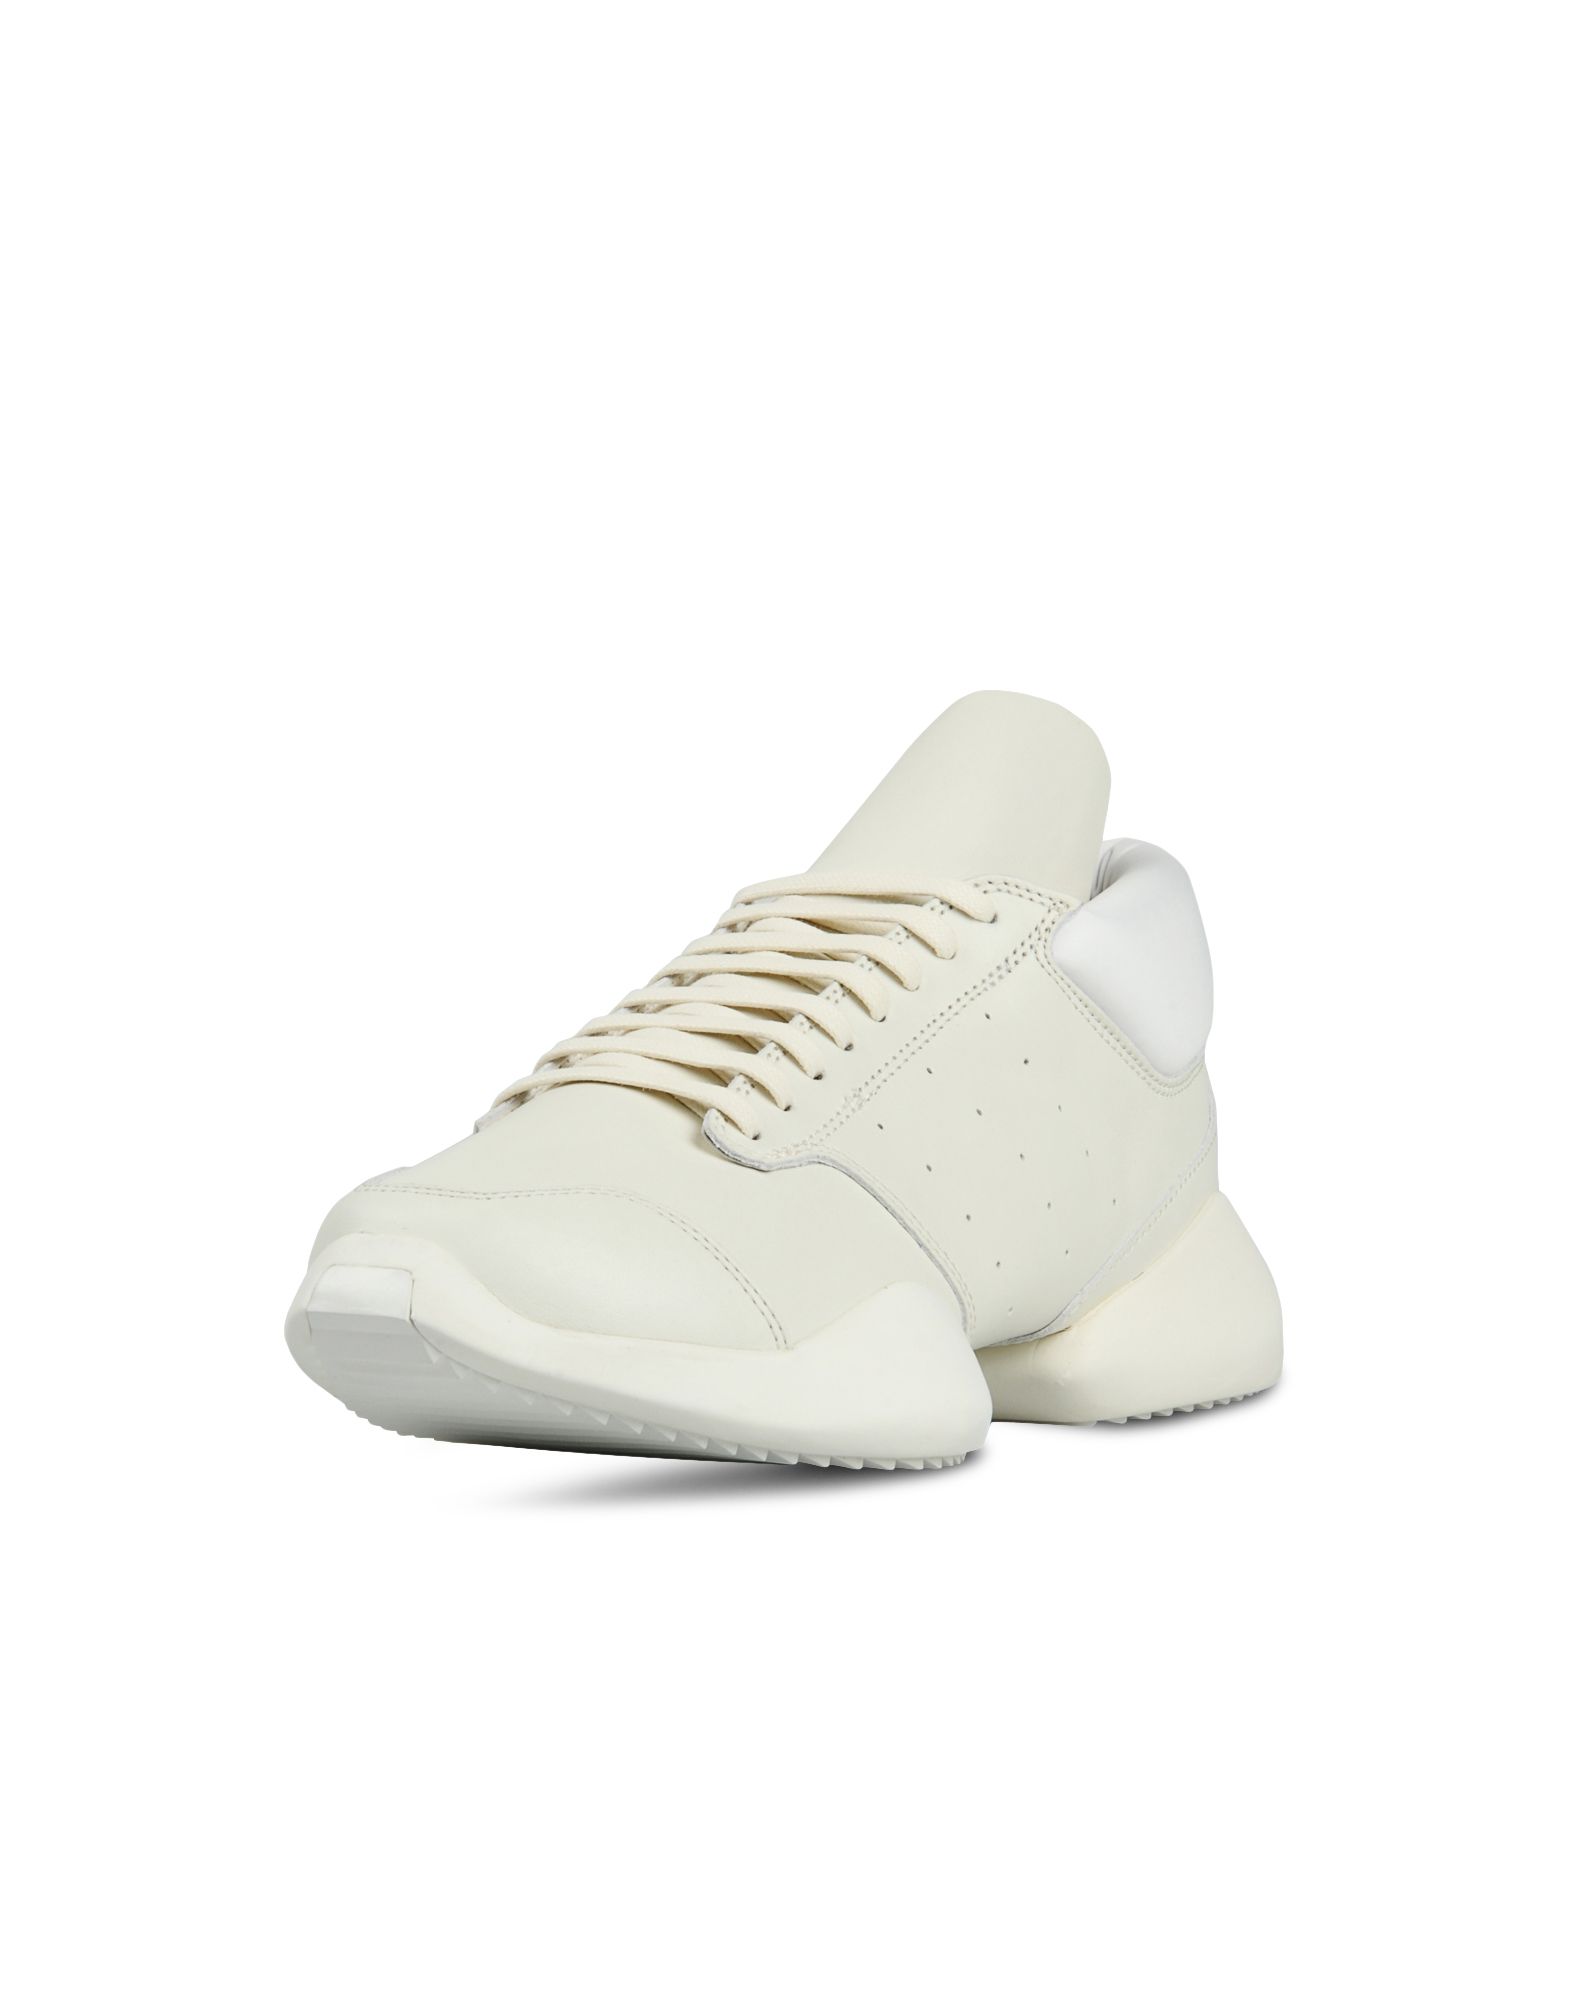 Adidas By RO RUNNER Sneakers | Adidas Y-3 Official Store